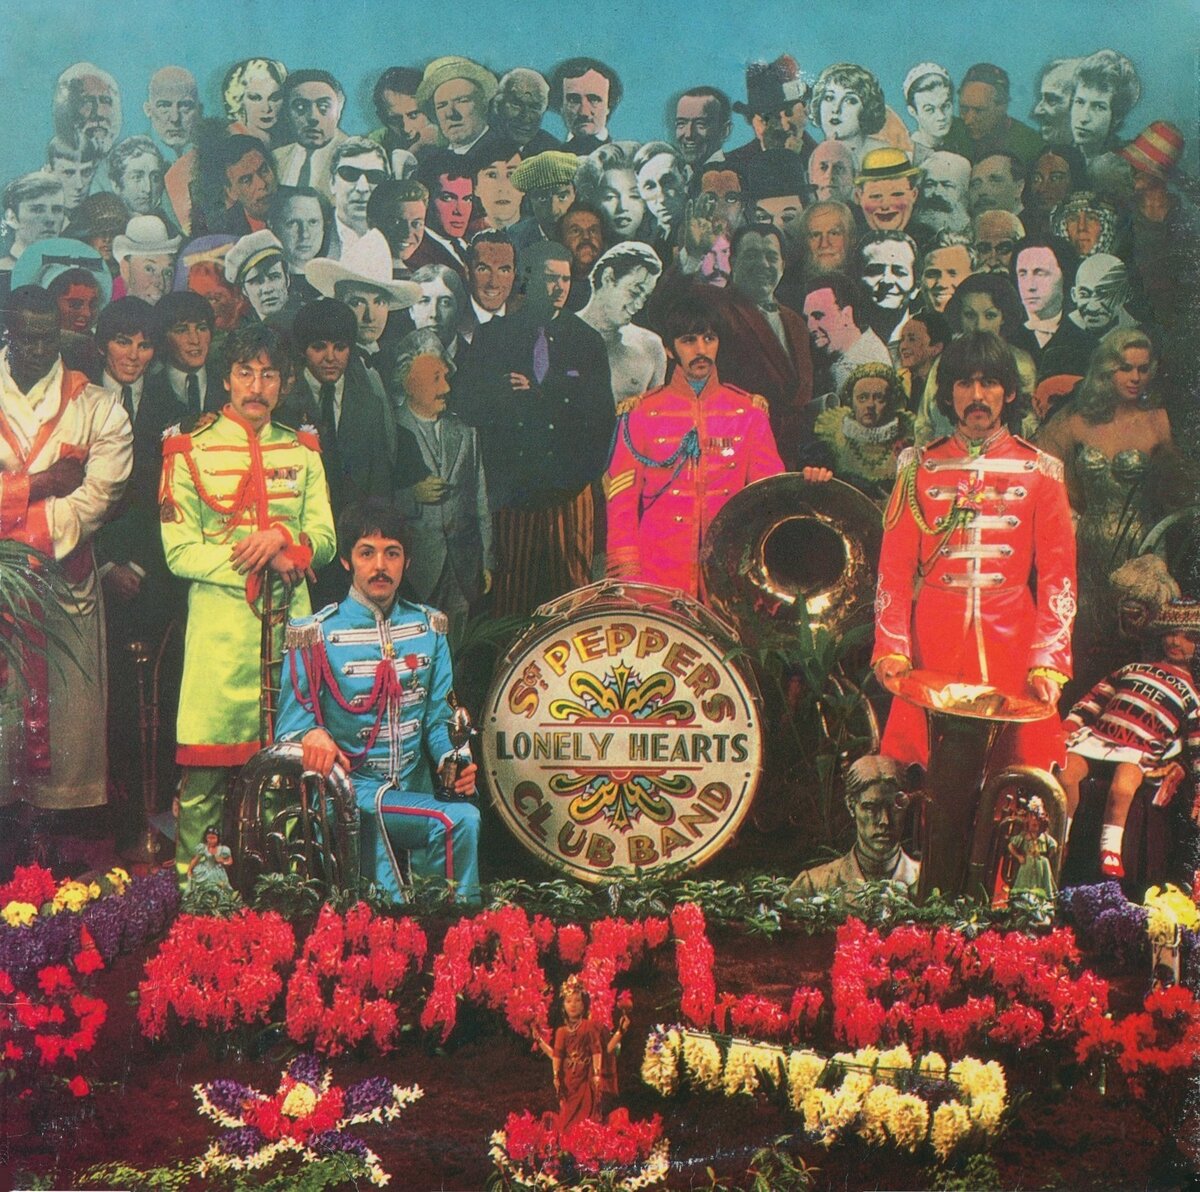 Beatles sgt pepper lonely. The Beatles Sgt. Pepper's Lonely Hearts Club Band обложка. The Beatles сержант Пеппер. Sgt Pepper s Lonely Hearts Club Band. Обложка альбома Битлз Sgt Pepper s Lonely Hearts Club Band.